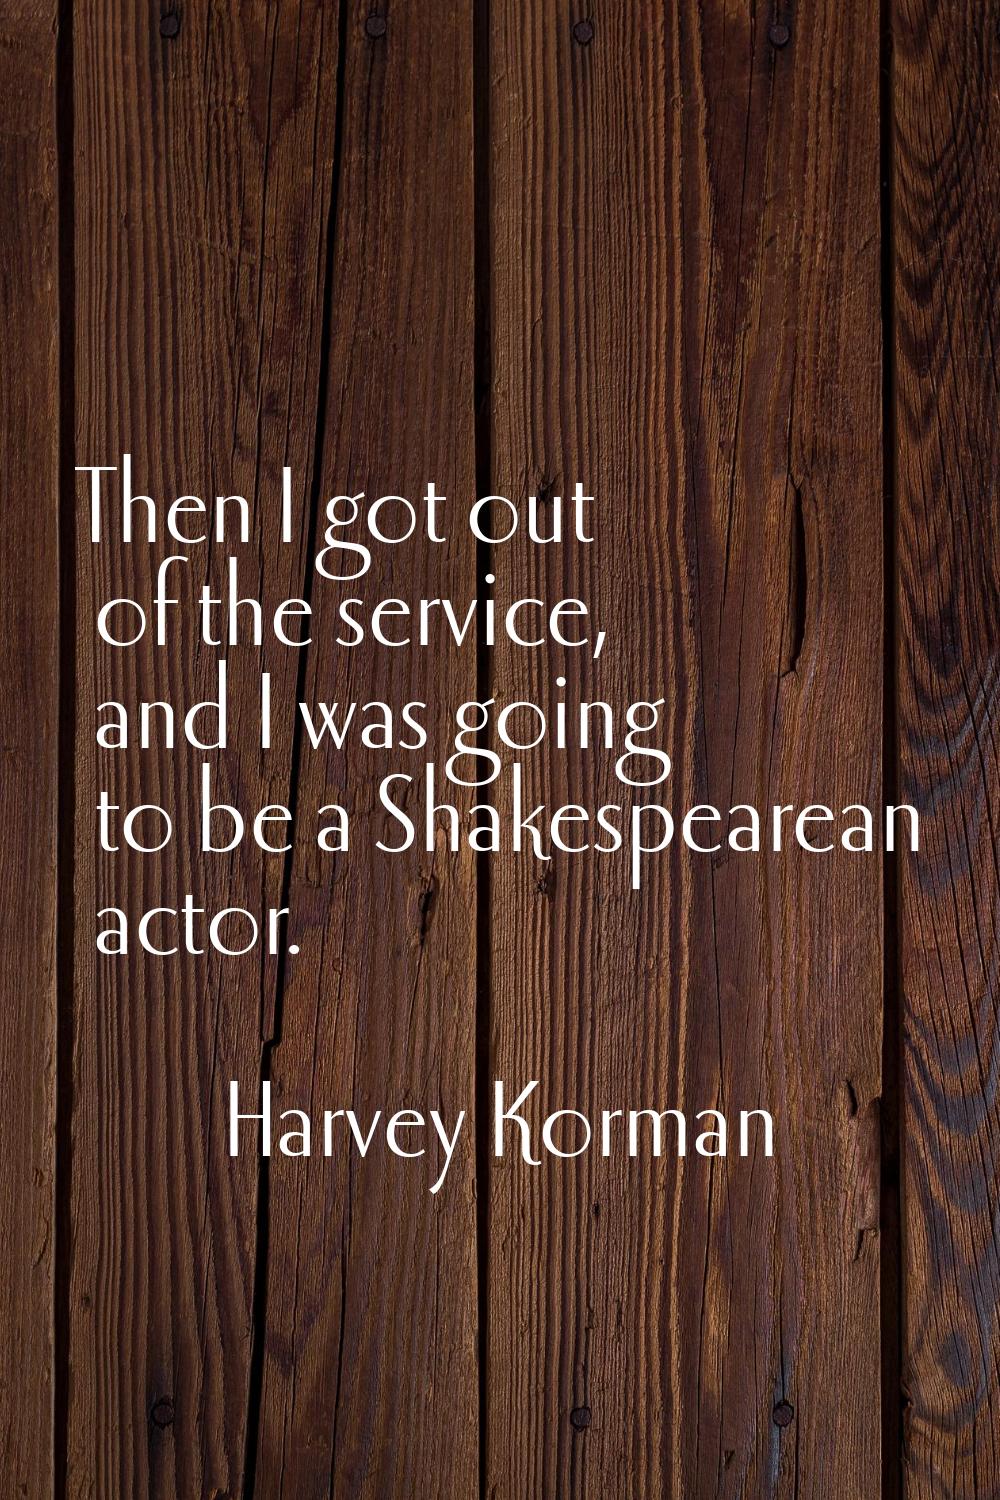 Then I got out of the service, and I was going to be a Shakespearean actor.